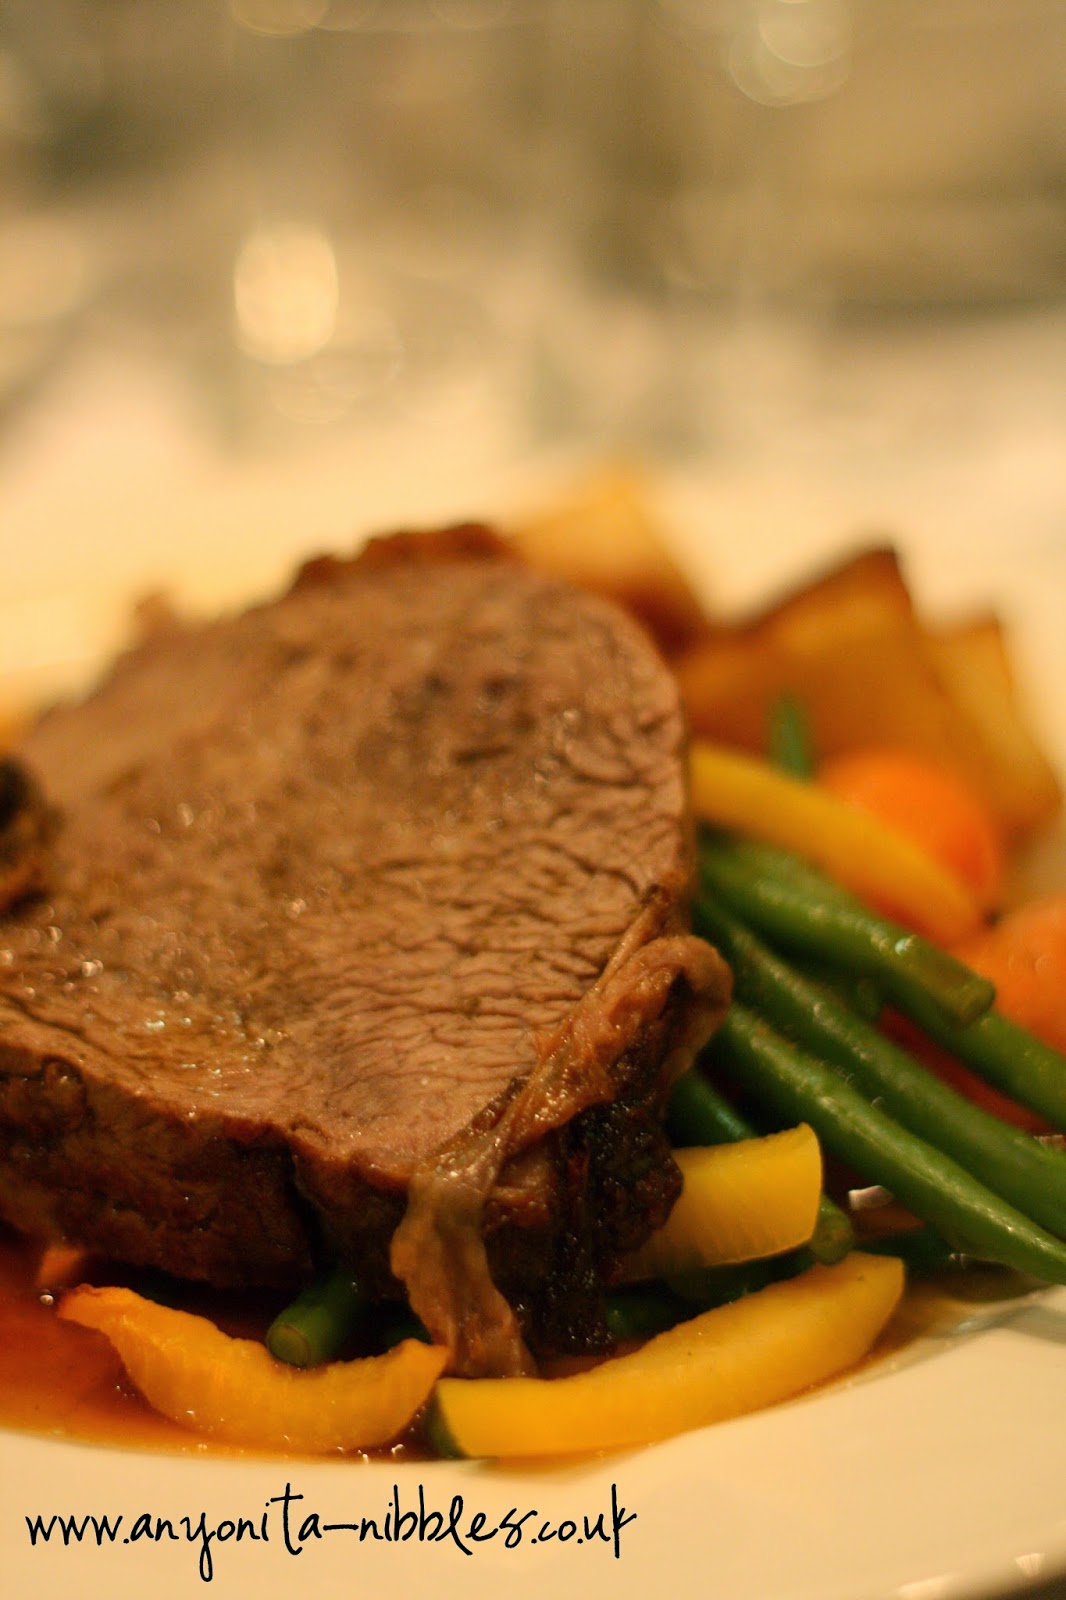 Roast beef and vegetables from the Renaissance Hotel in Manchester | Anyonita-Nibbles.co.uk